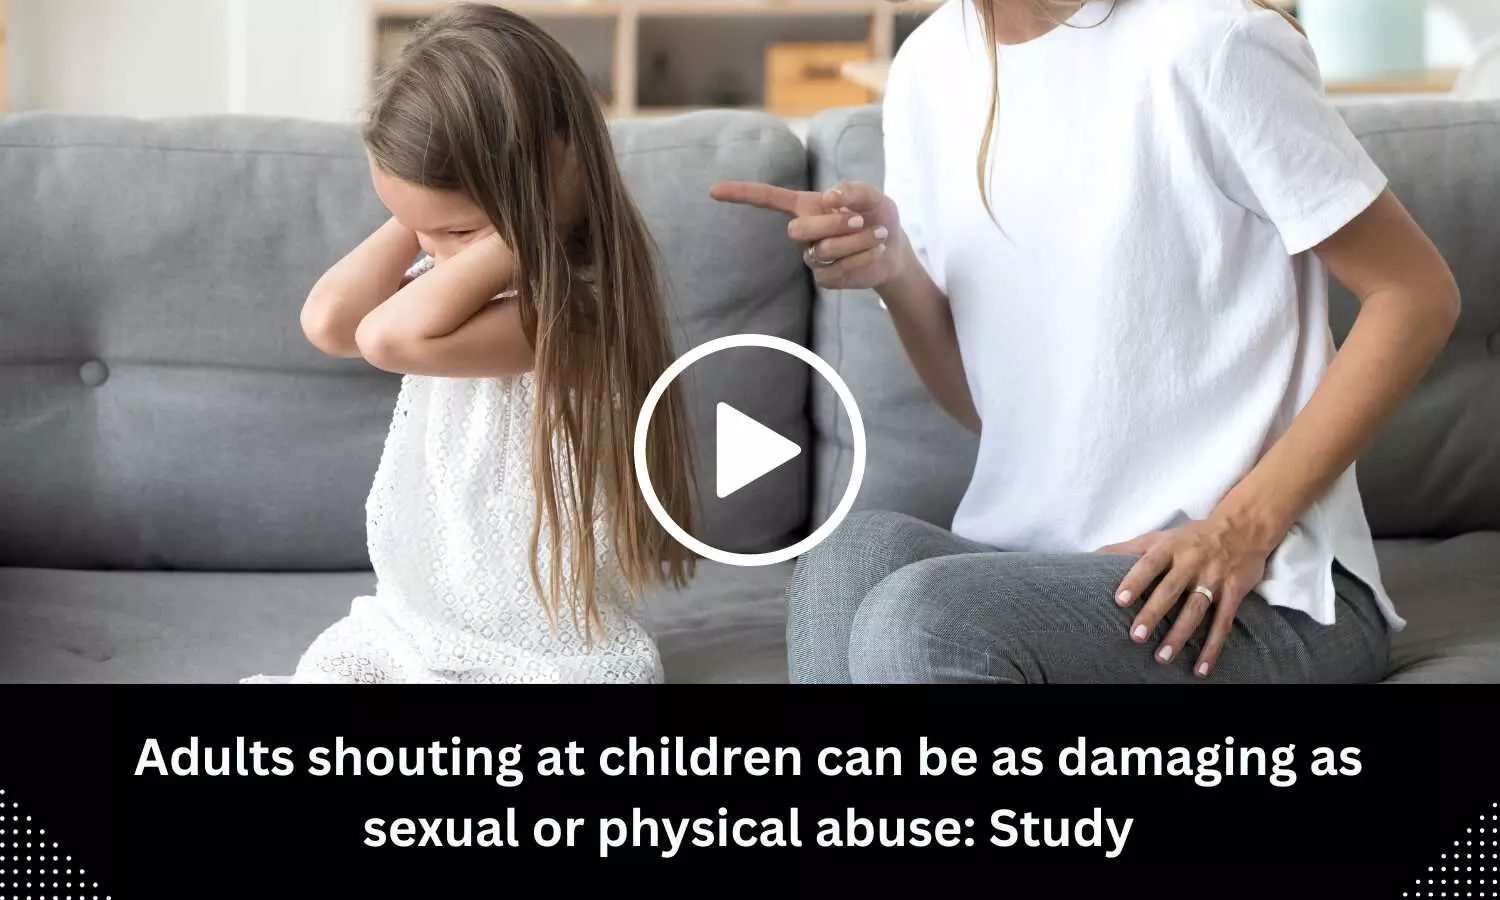 Adults shouting at children can be as damaging as sexual or physical abuse: Study